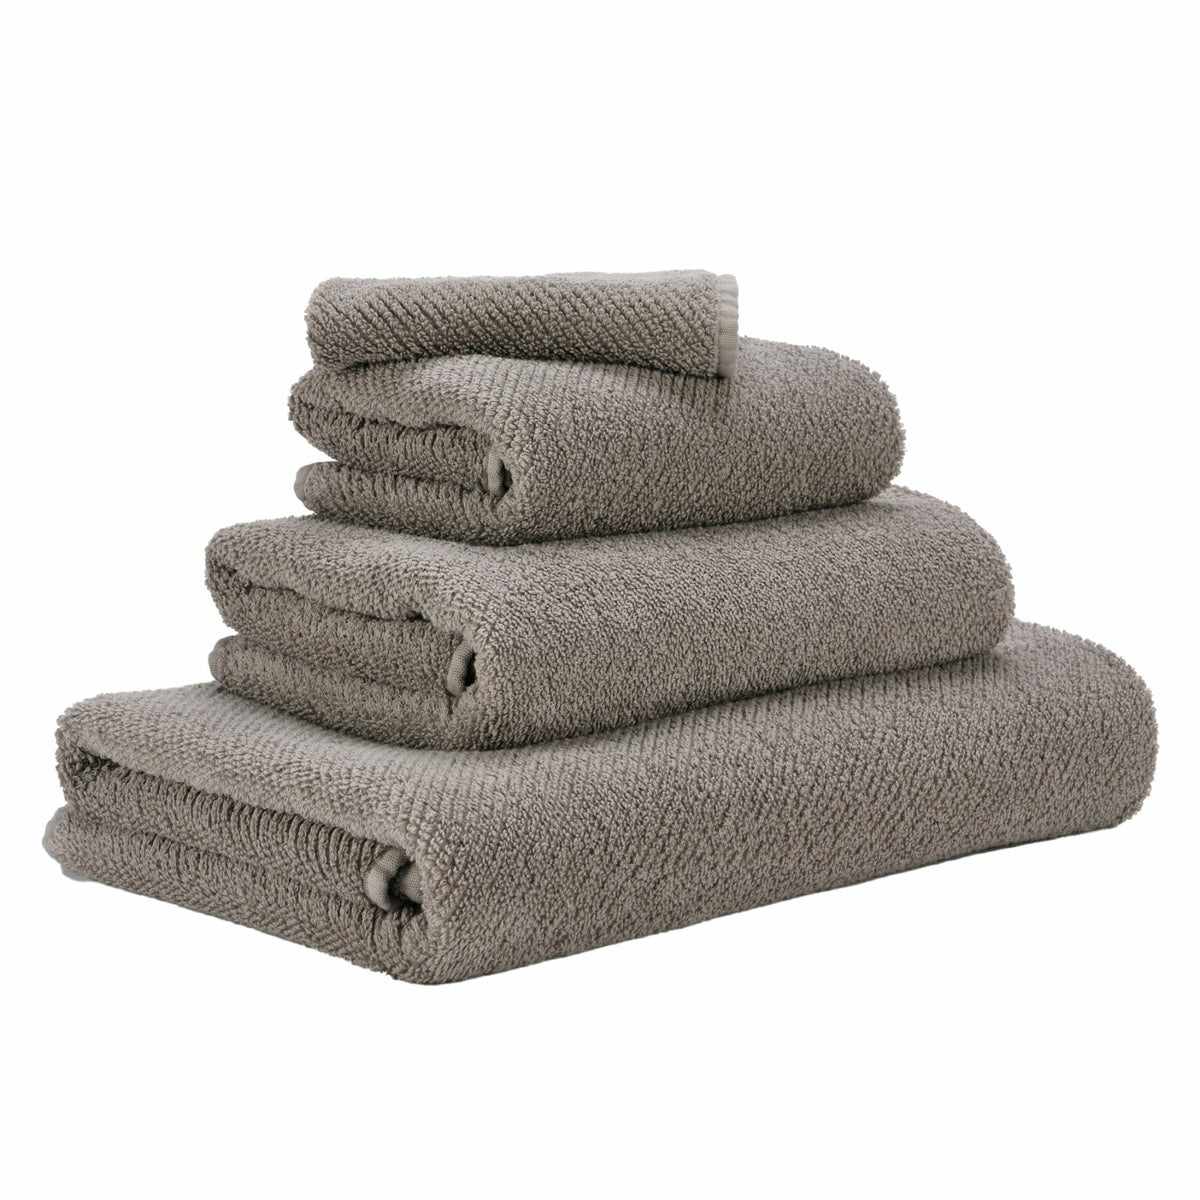 Spa Towels by Abyss and Habidecor, Euro Hand 21x39 / Linen